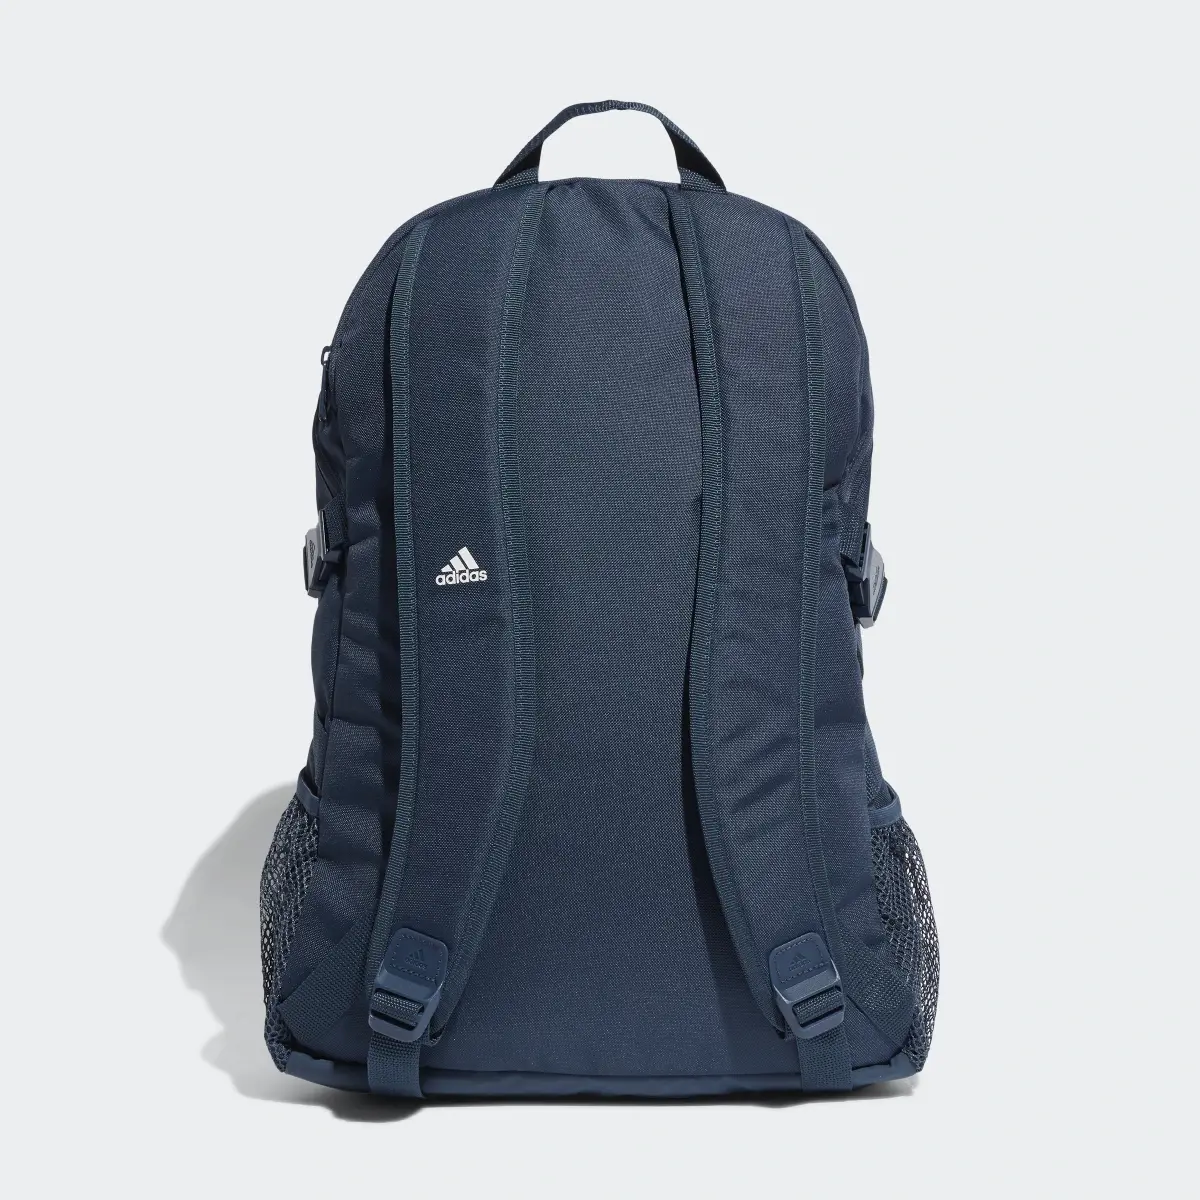 Adidas Power 5 Backpack. 3